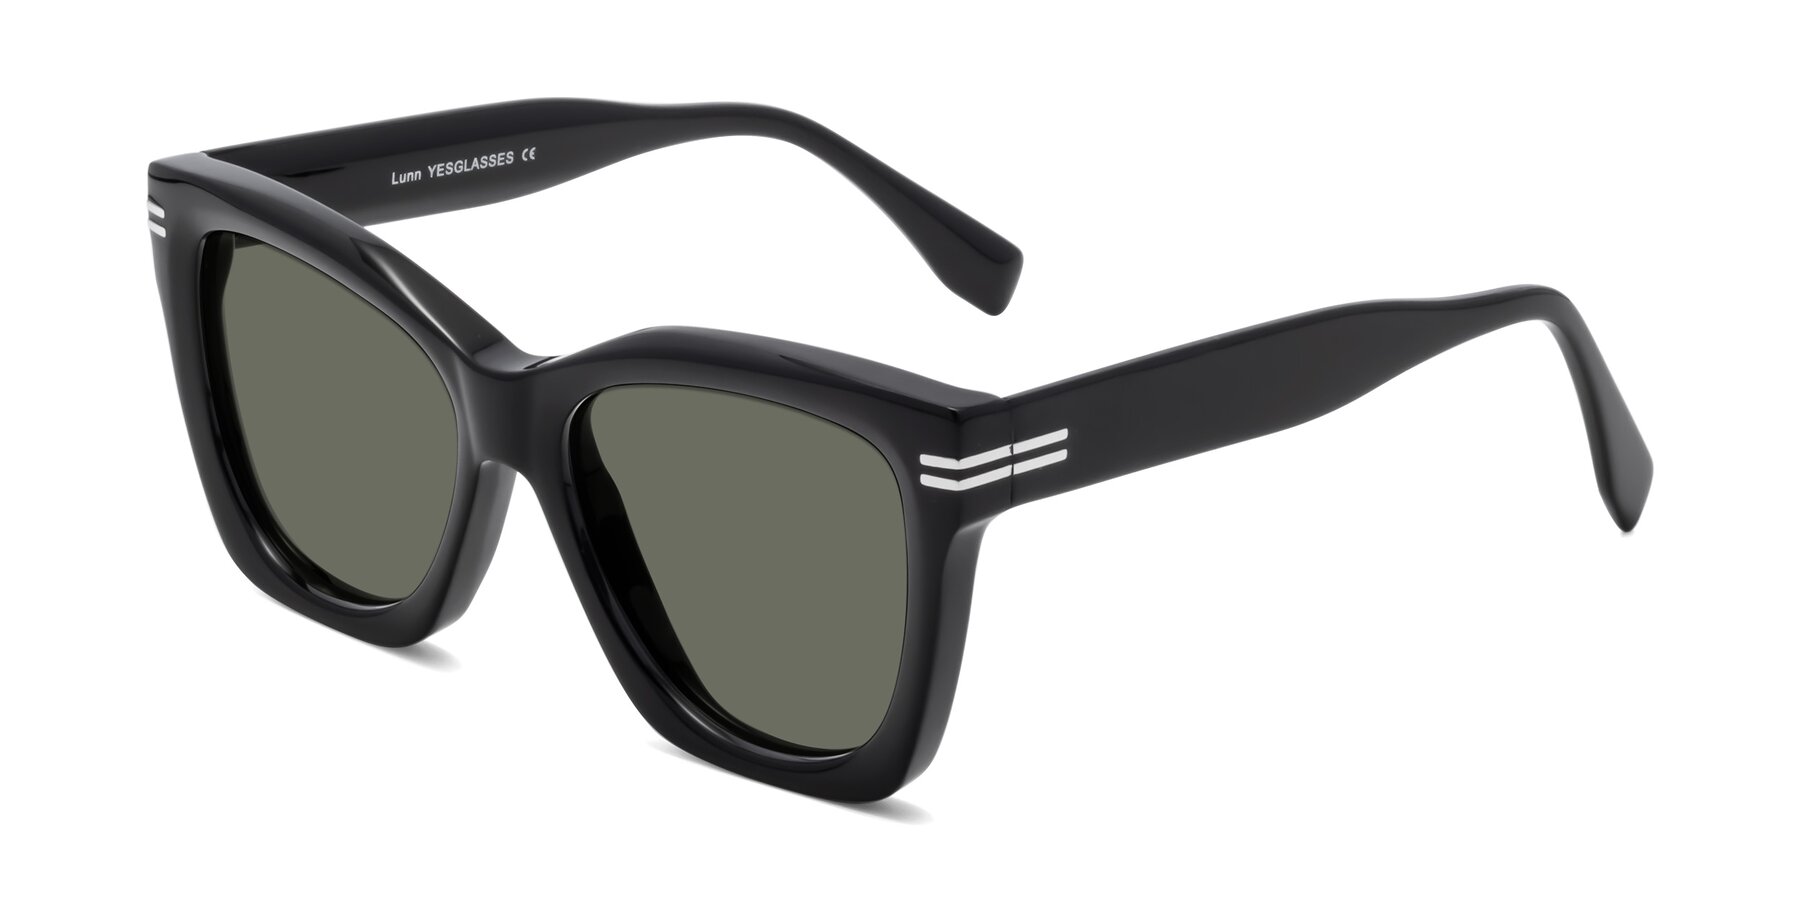 Angle of Lunn in Black with Gray Polarized Lenses